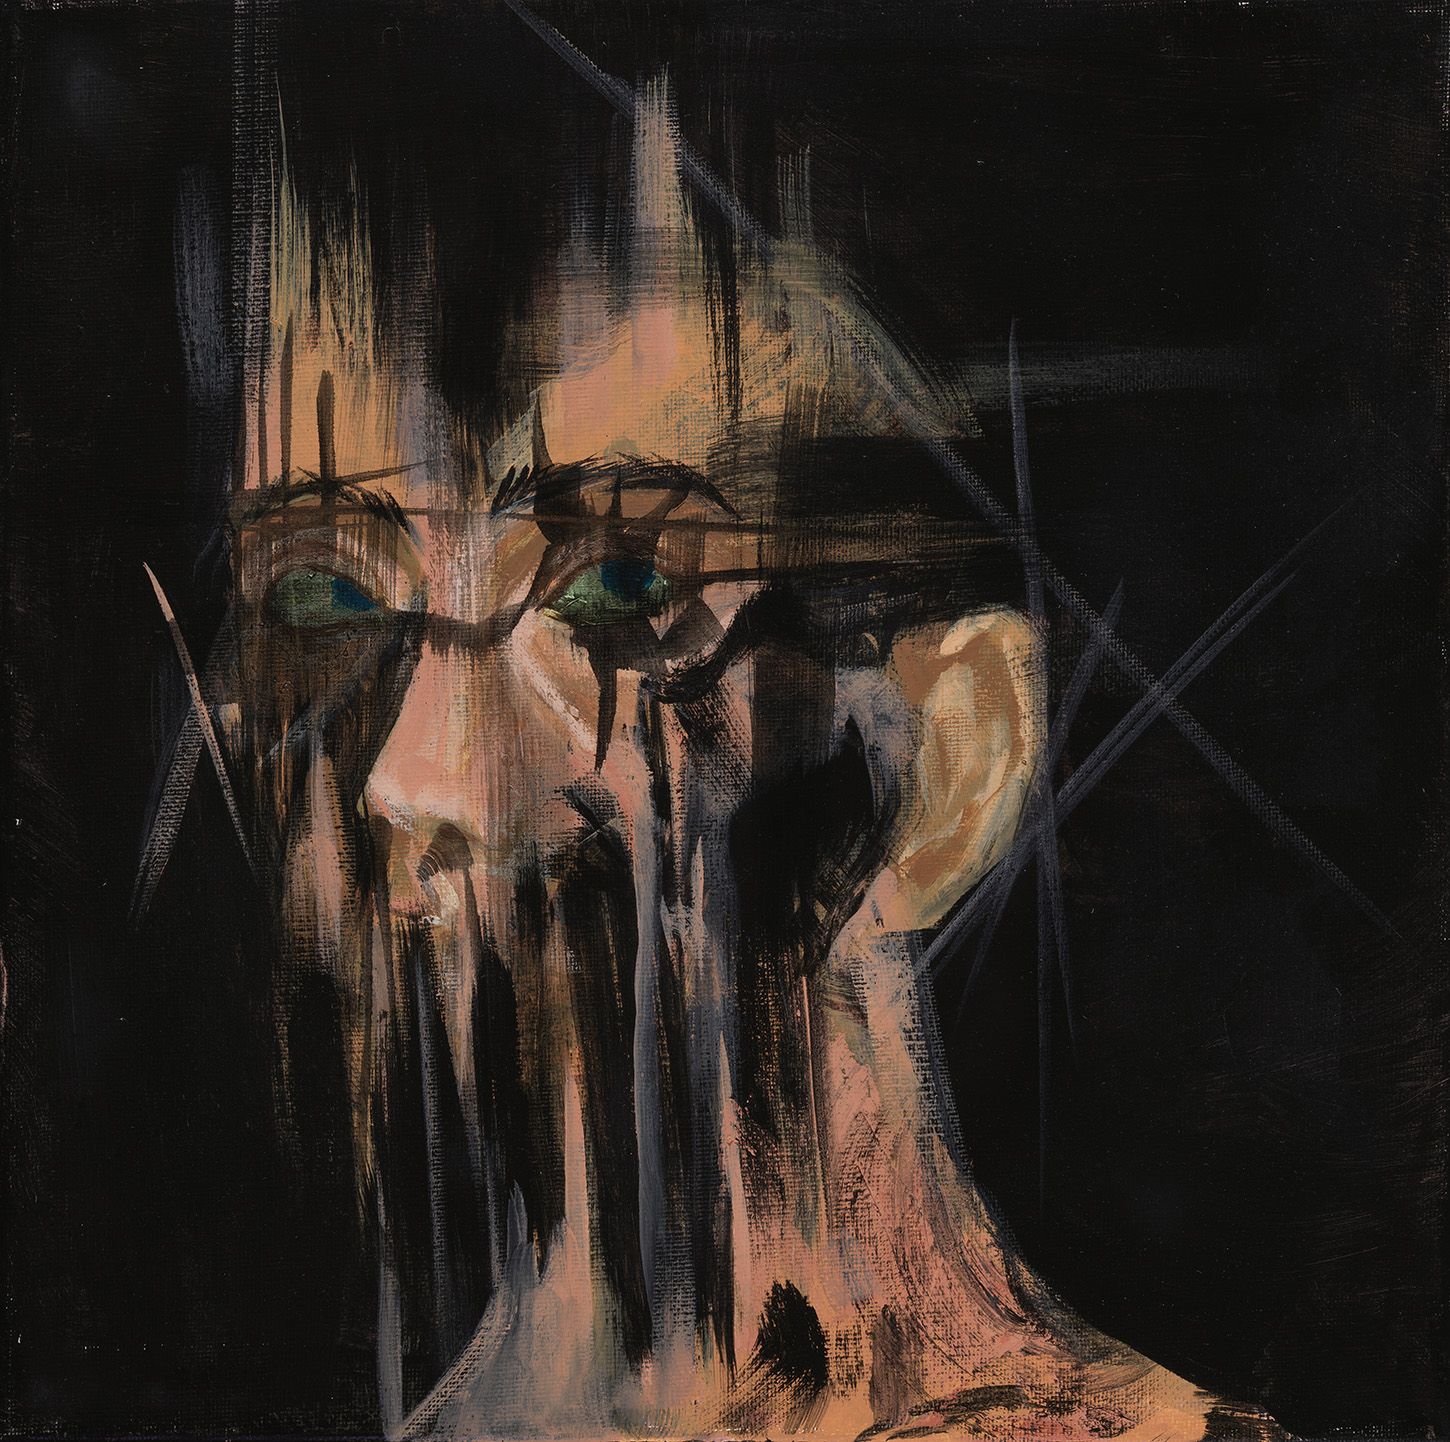 Painted portrait of a distorted human head